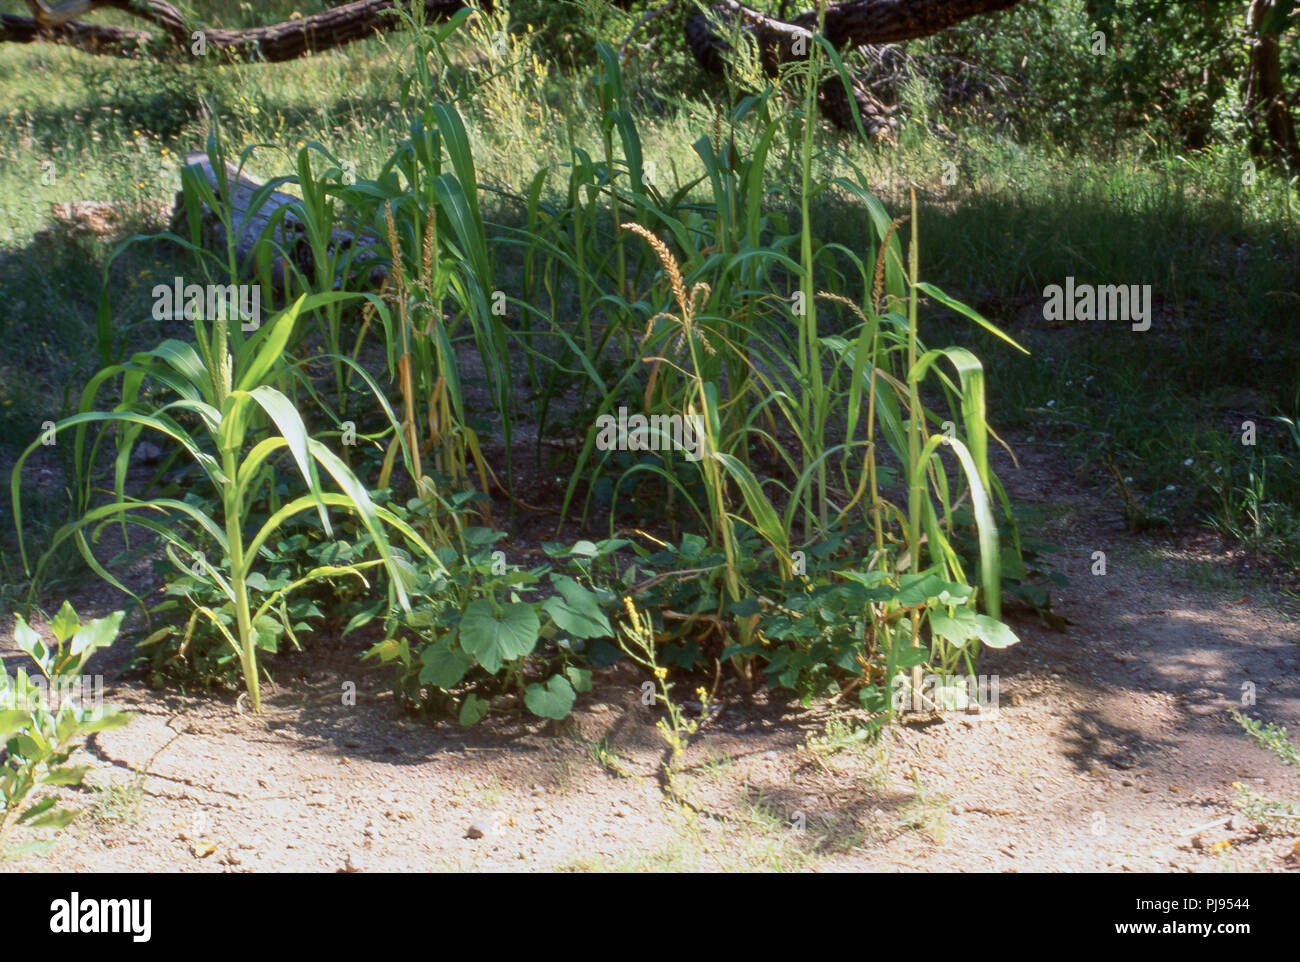 Native American garden of Maize, beans, and squash, Bandelier New Mexico. Photograph Stock Photo